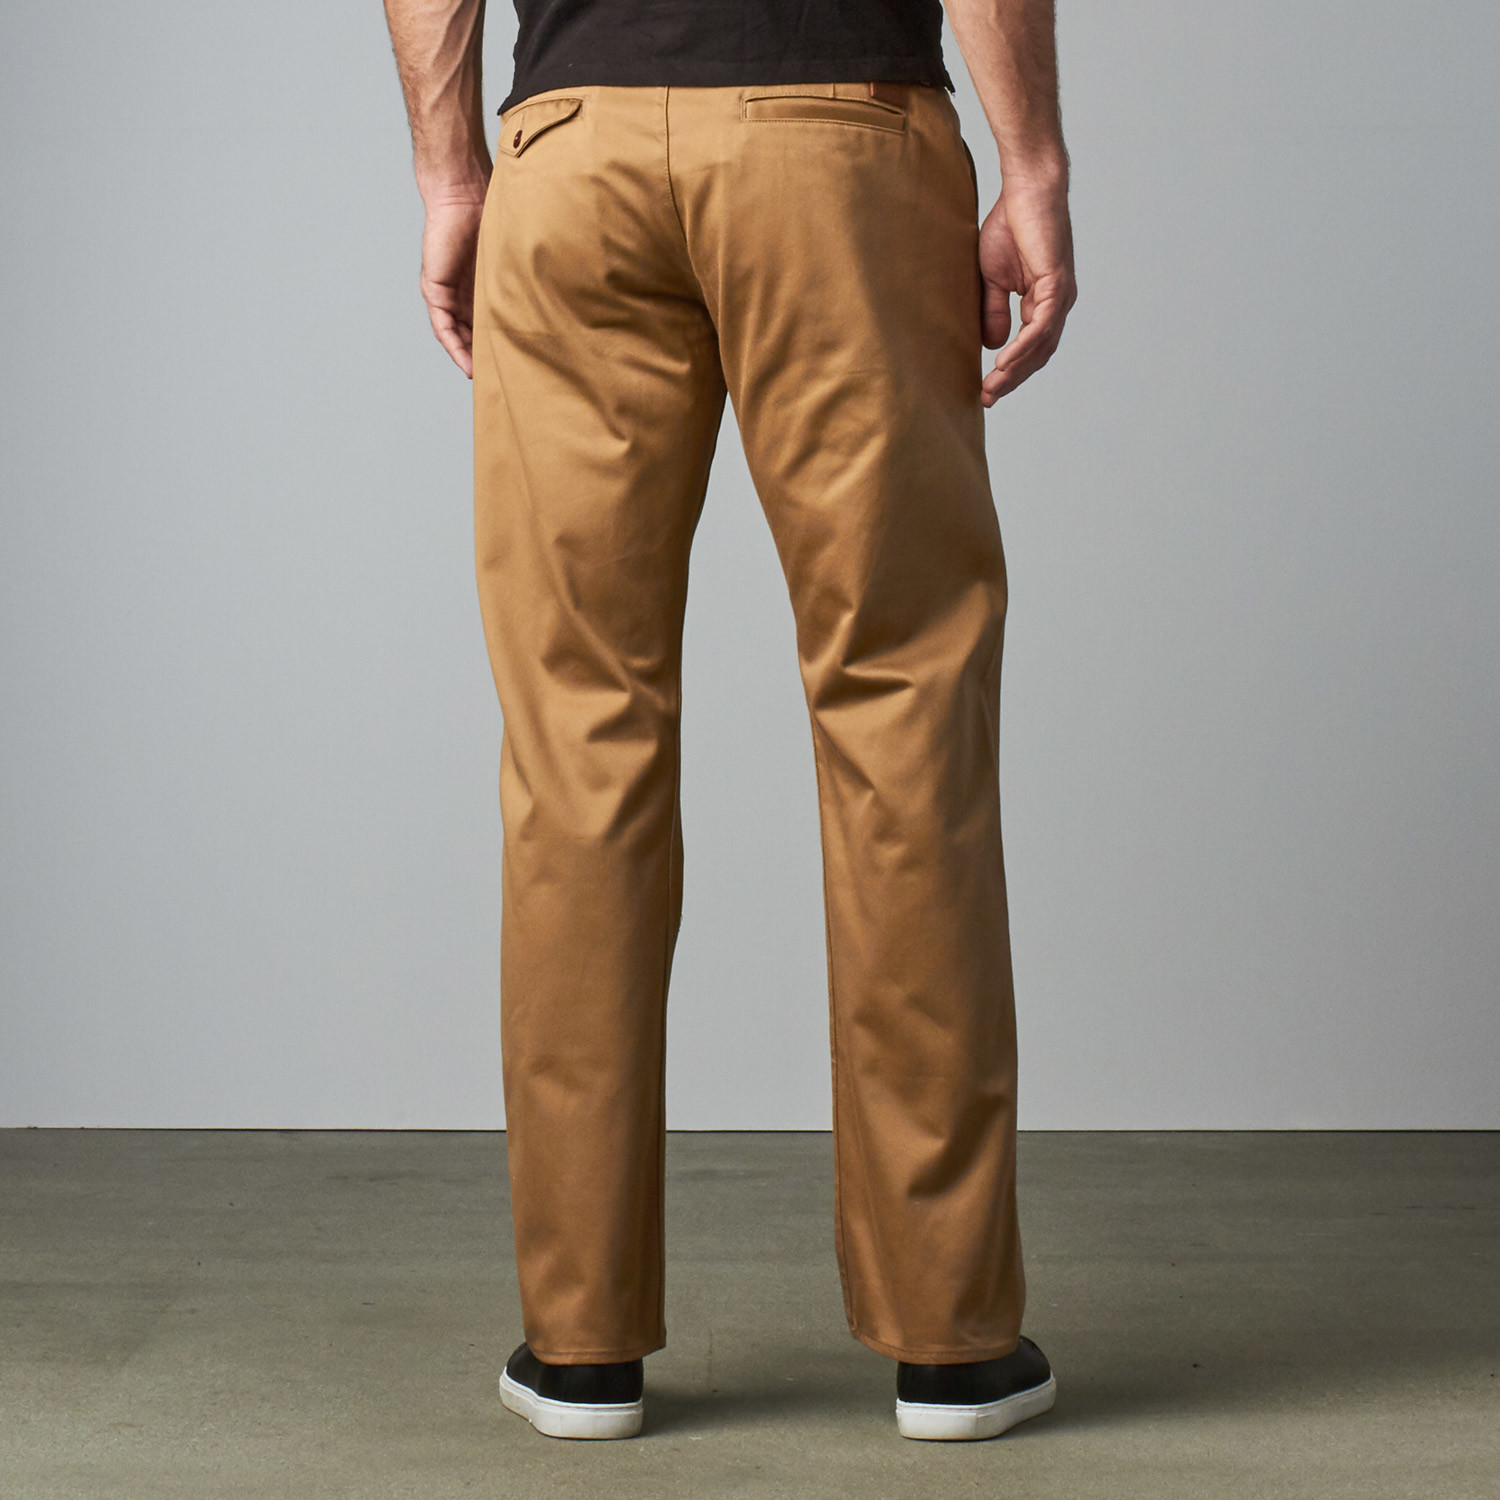 Workers Chino Relaxed Fit Pant // Khaki (29WX32L) - FreeNote Clothing ...